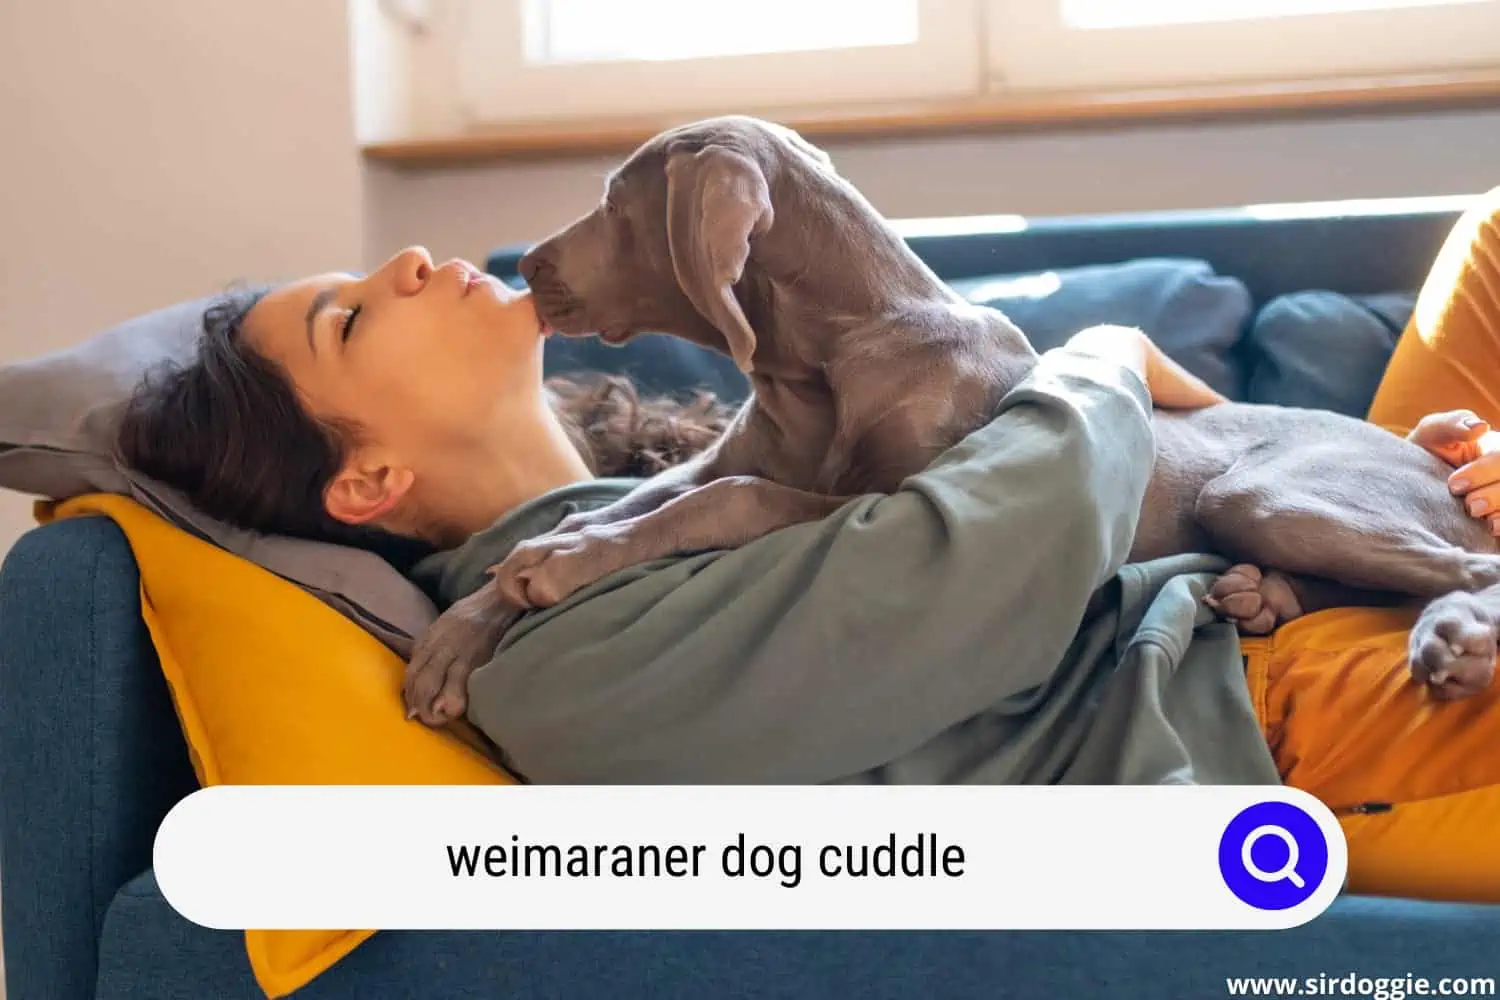 A Weimaraner dog who likes to cuddle with owner